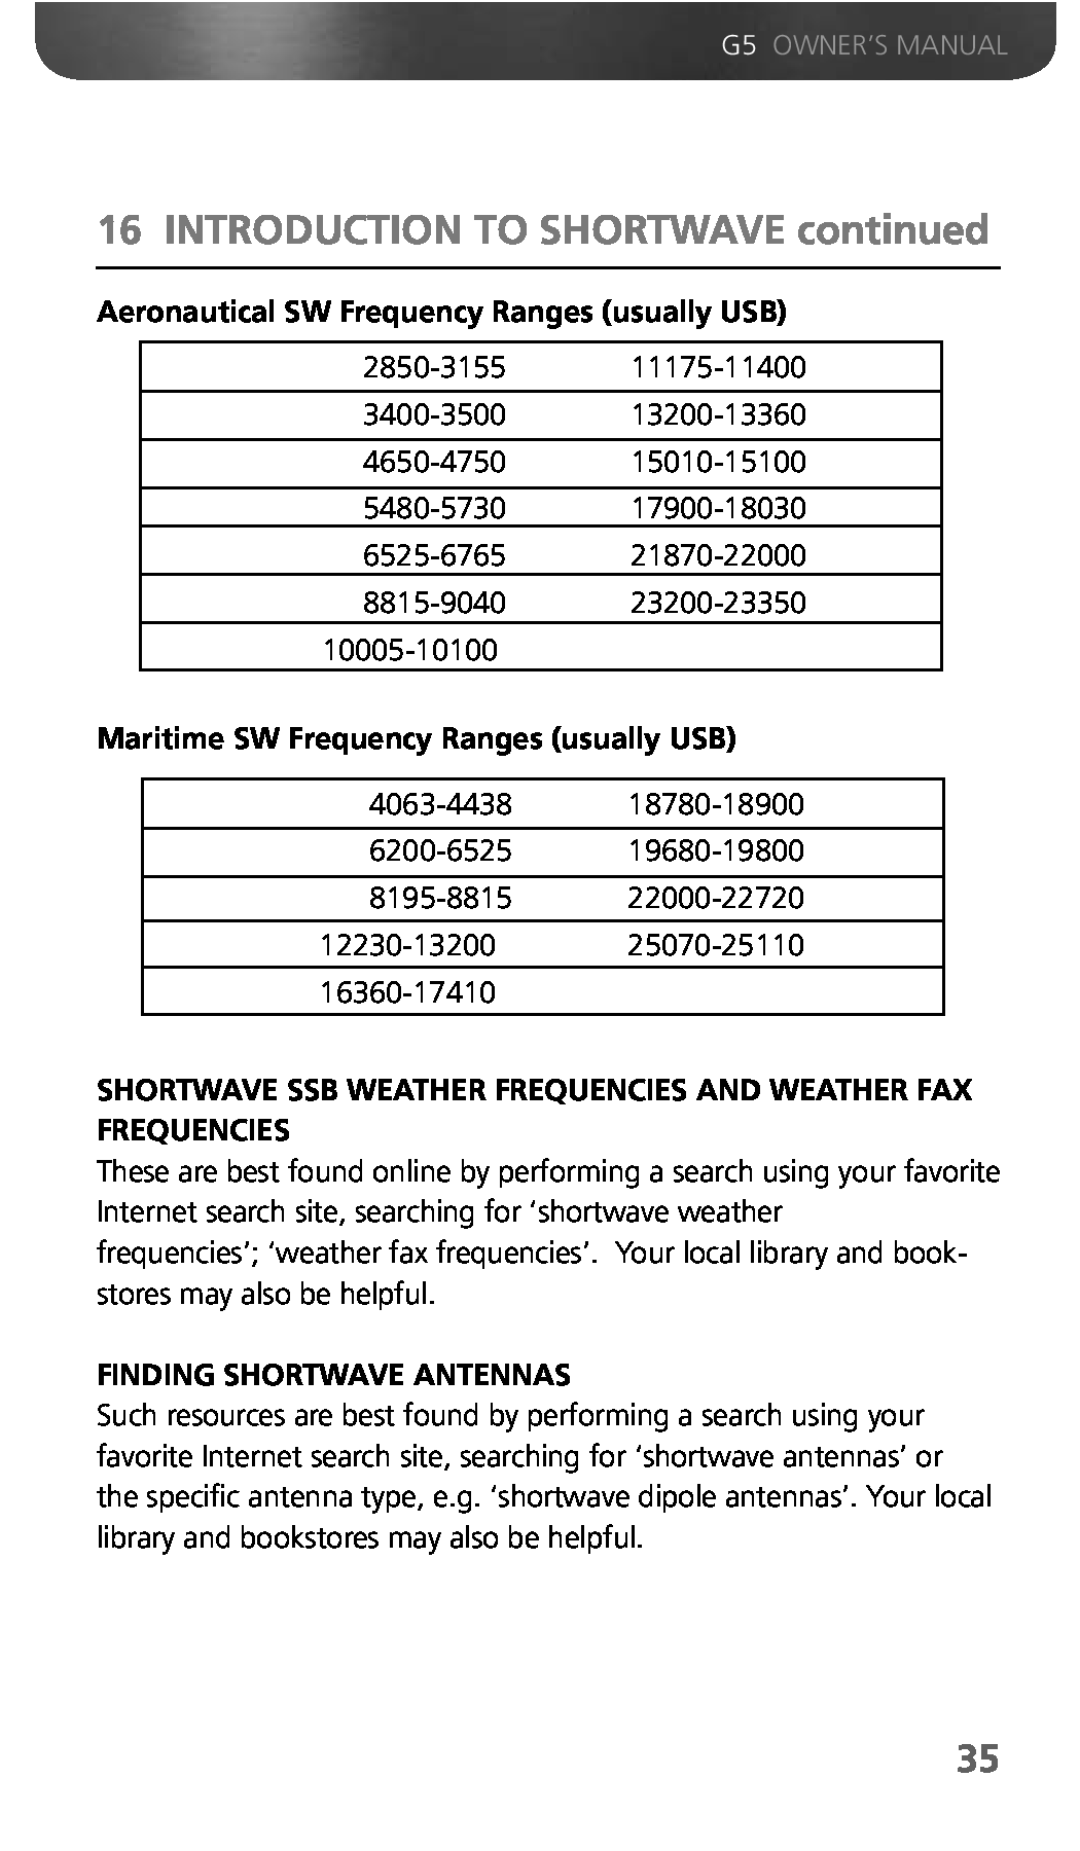 Eton G5 INTRODUCTION TO SHORTWAVE continued, Aeronautical SW Frequency Ranges usually USB, Finding Shortwave Antennas 